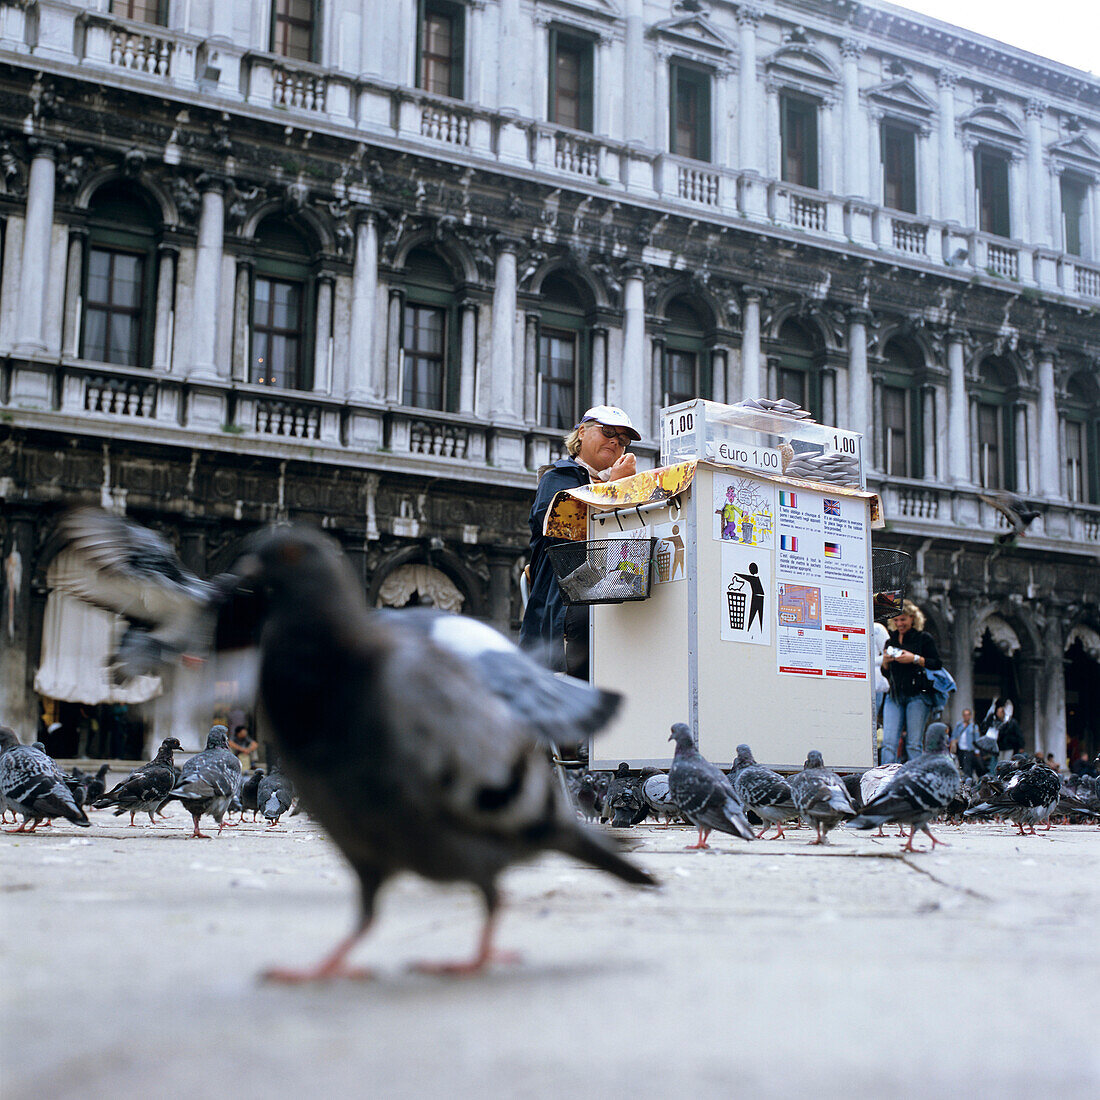 Newspaper man with bookstall and pigeons at St. Marks Square, Venice, Italy